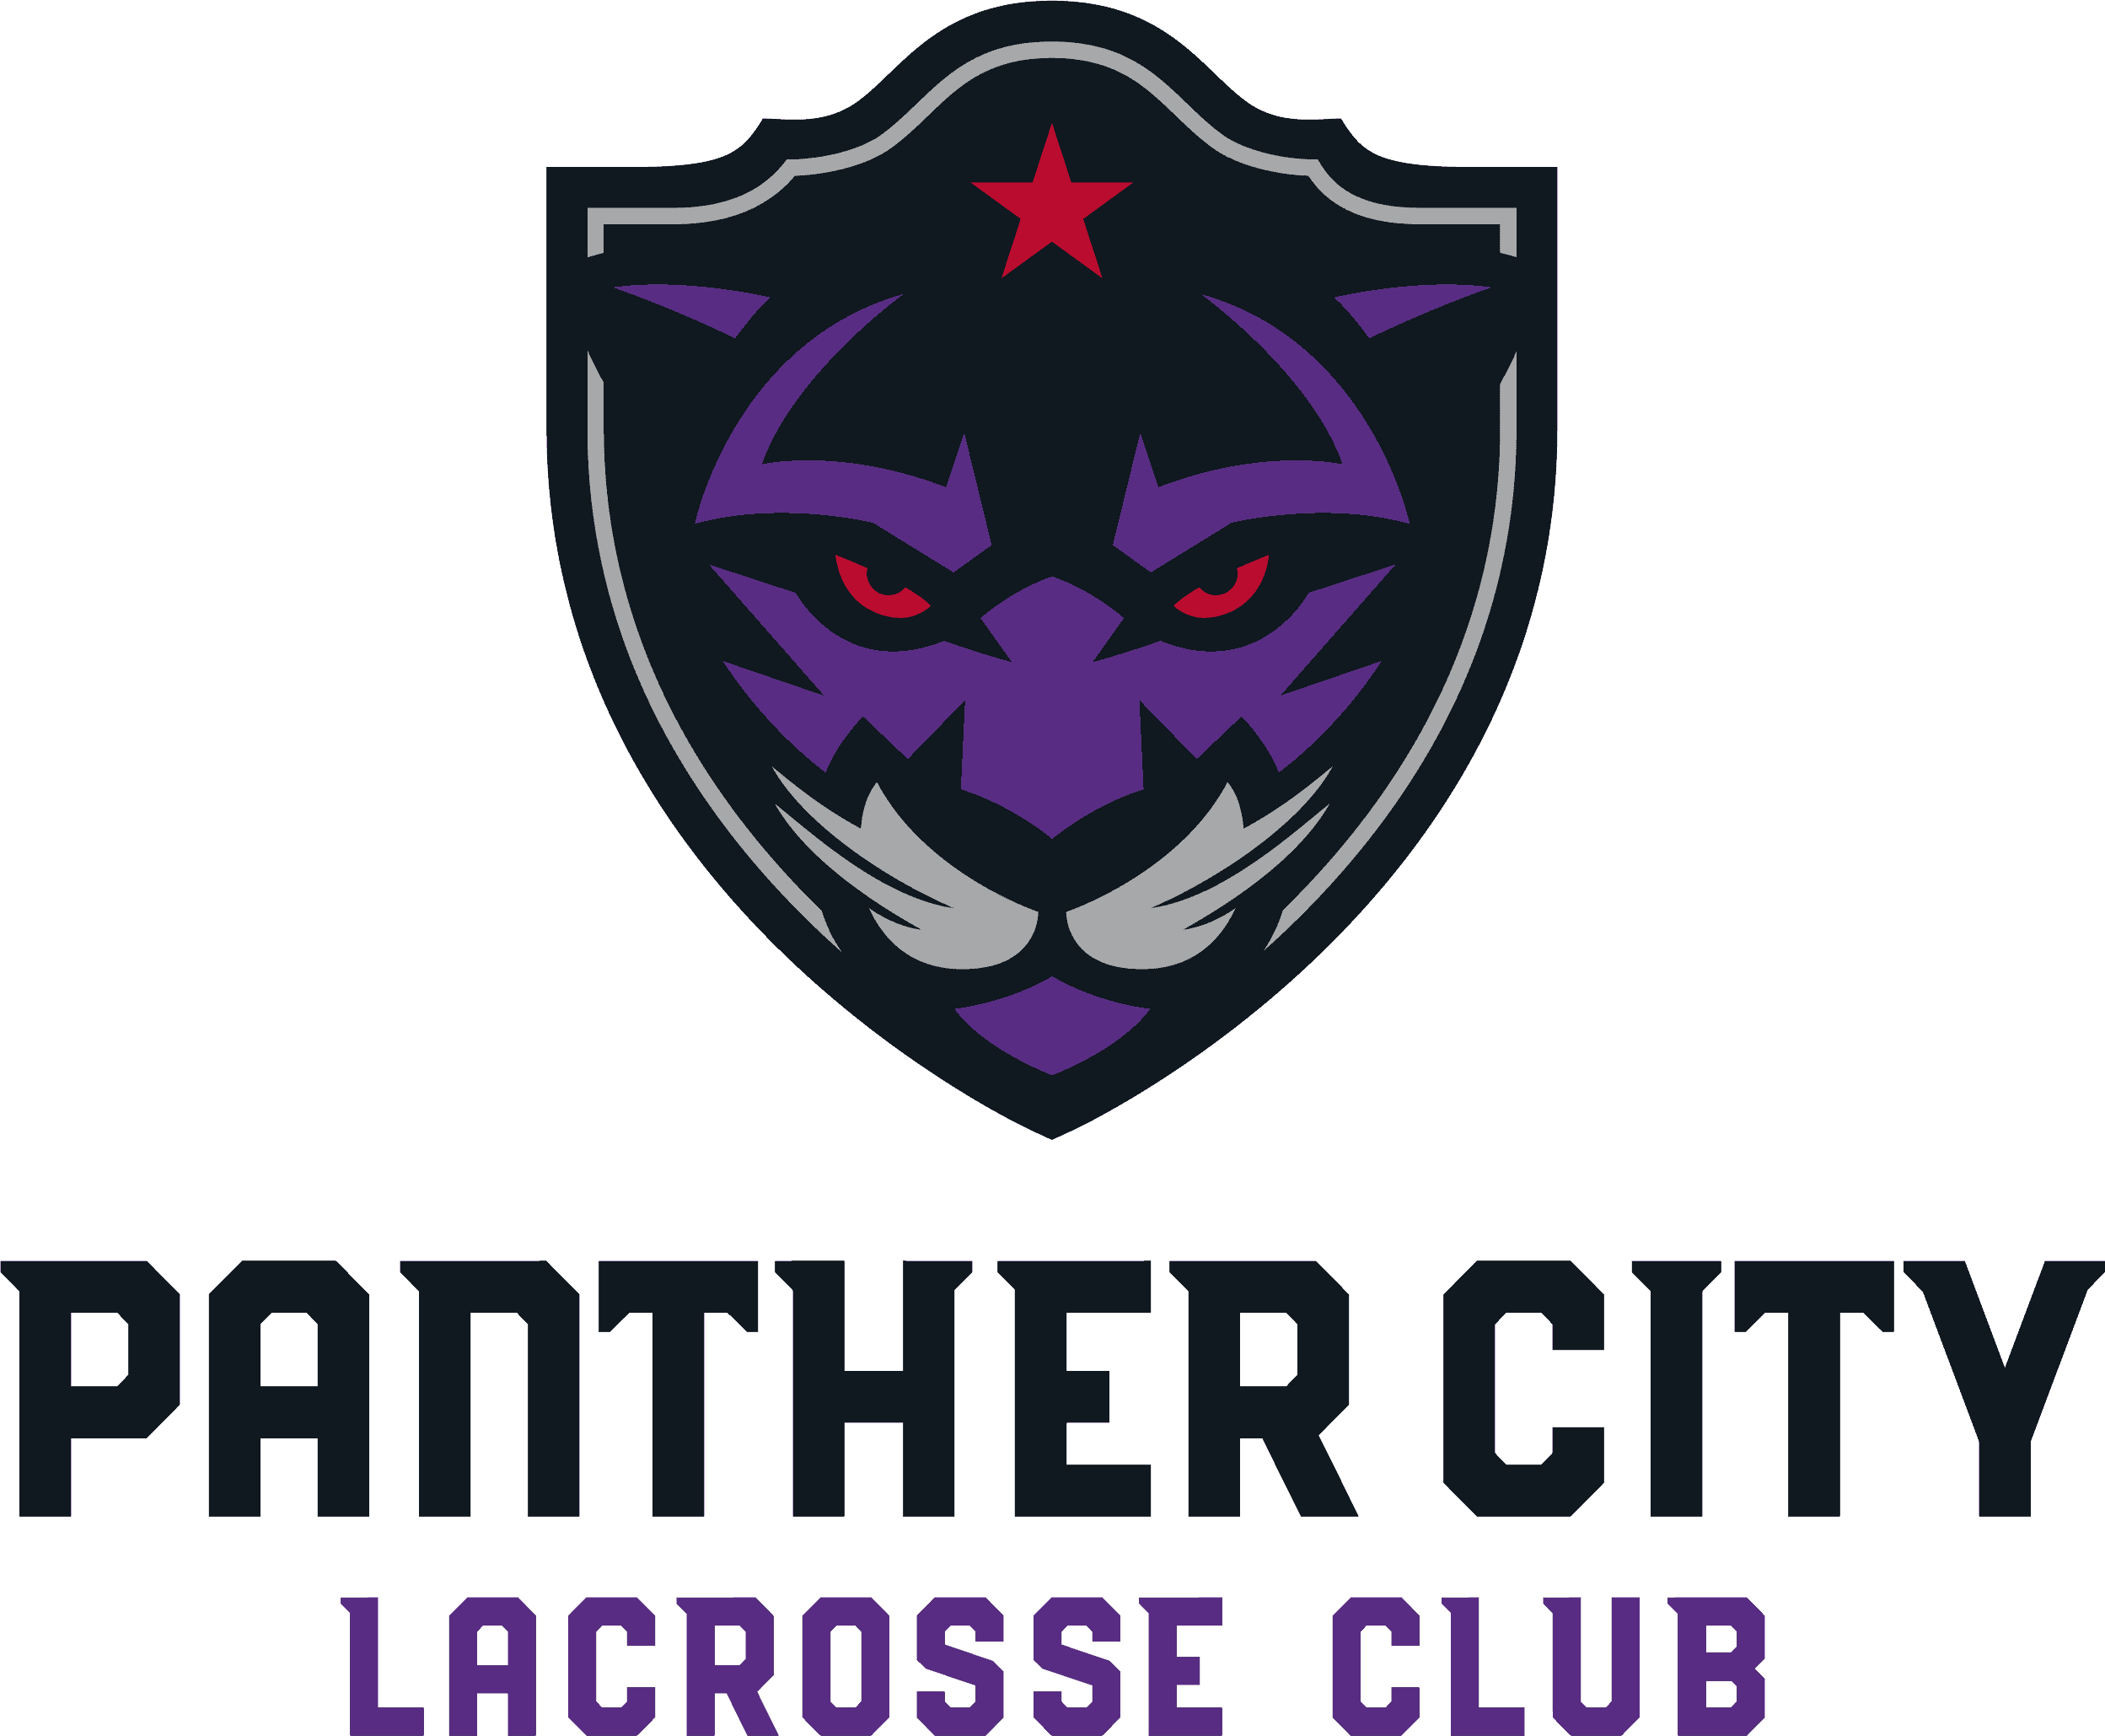 Download PNG image - Panther City Lacrosse Club PNG HD 